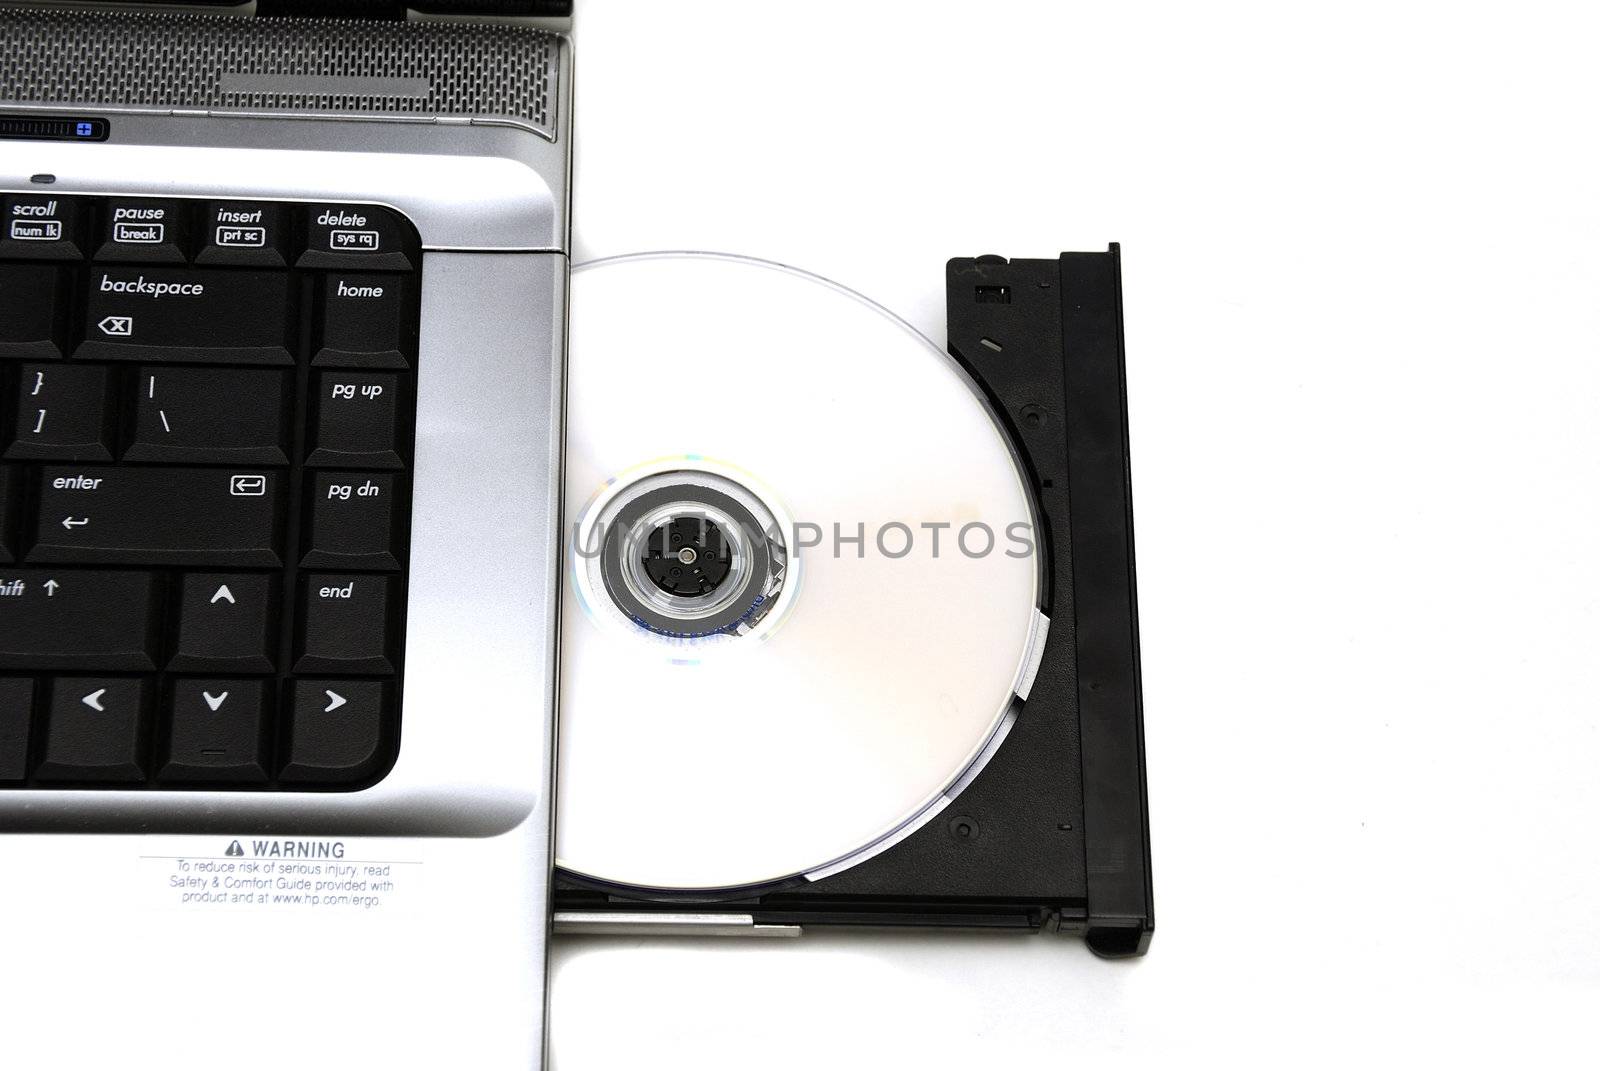 Open laptop CD-ROM drive on a white background

